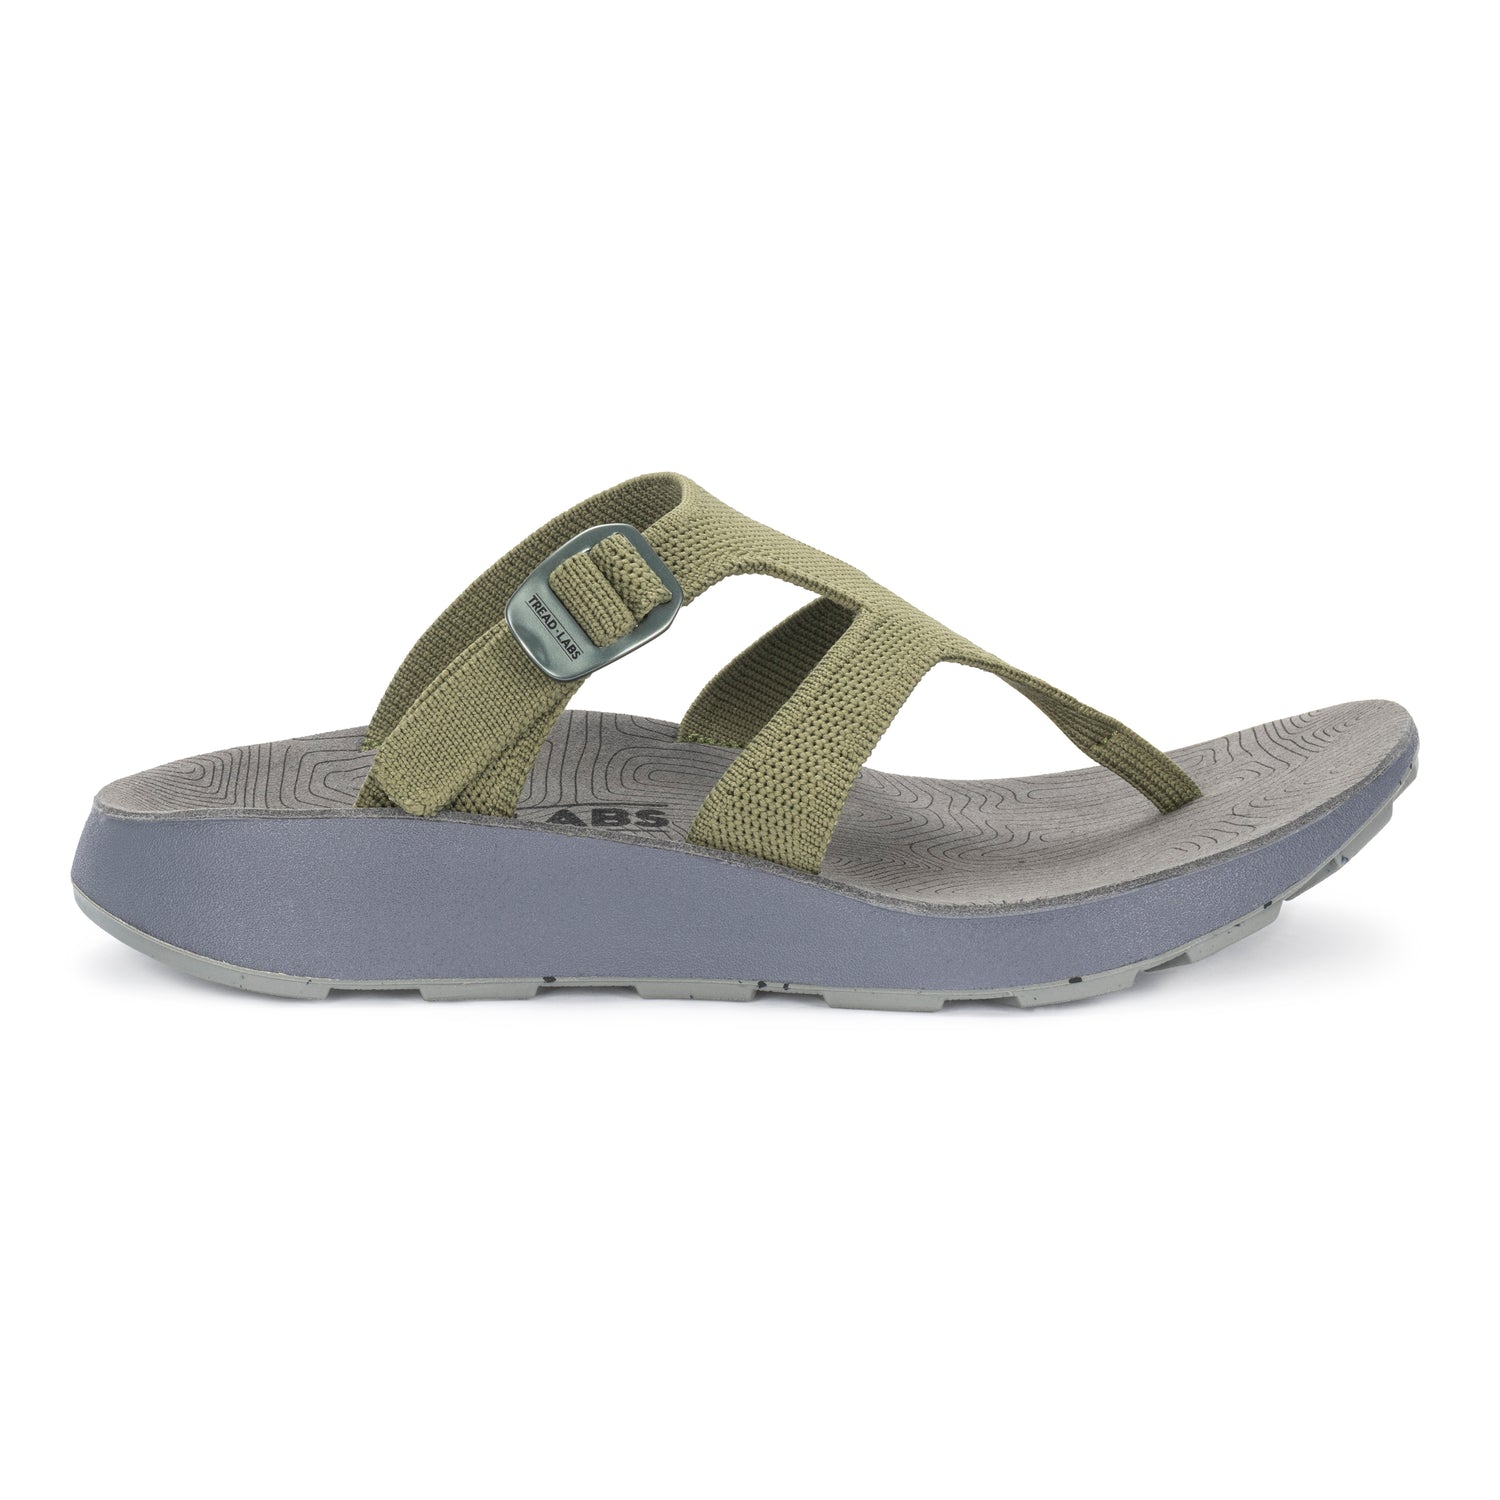 Women's Covelo Sandal with Arch Support in Leaf Green